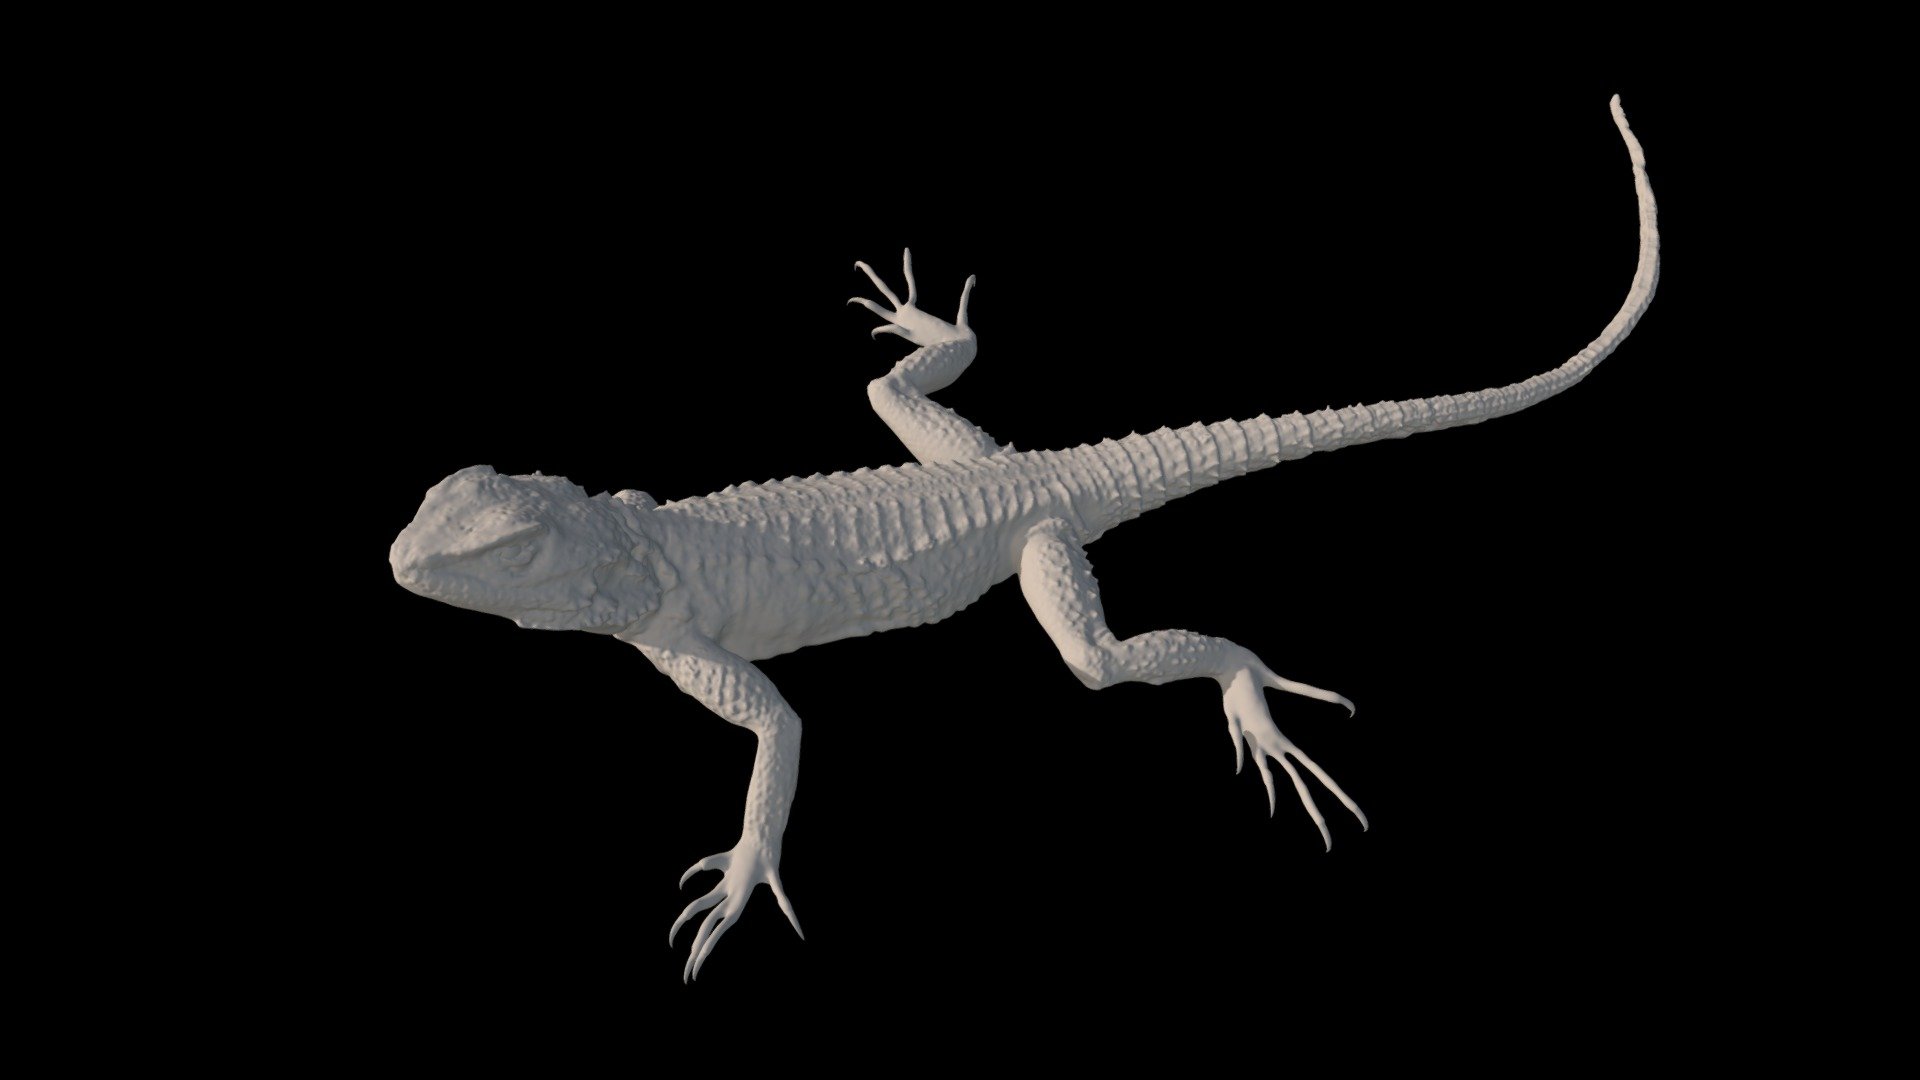 This is a 3D mesh of a Sling tailed Agama lizard (Stellagama stellio cypriaca) scanned using the Beastcam MACRO on a live lizard in Cyprus. The mass of the lizard is 78 grams. CG artist Jer Bot retopologized and reconstructed the snake in the open source 3D animation software Blender (blender.org). He did this through images captured using an array of six Canon G16 cameras and other reference photos. The construction of this model is part of the post-doc research of Dr. Savvas Zotos (POST-DOC/0916/0034)(https://retrack.terracypria.org) and is co-financed by the European Regional Development Fund and the Republic of Cyprus through the Research and Innovation Foundation. This 3D model will be used as a means for both studying and presenting the species movement and behavioural patterns.

Downloads are freely available for creative and non-profit use. To inquire about licensing, please visit www.digitallife3d.org 3d model